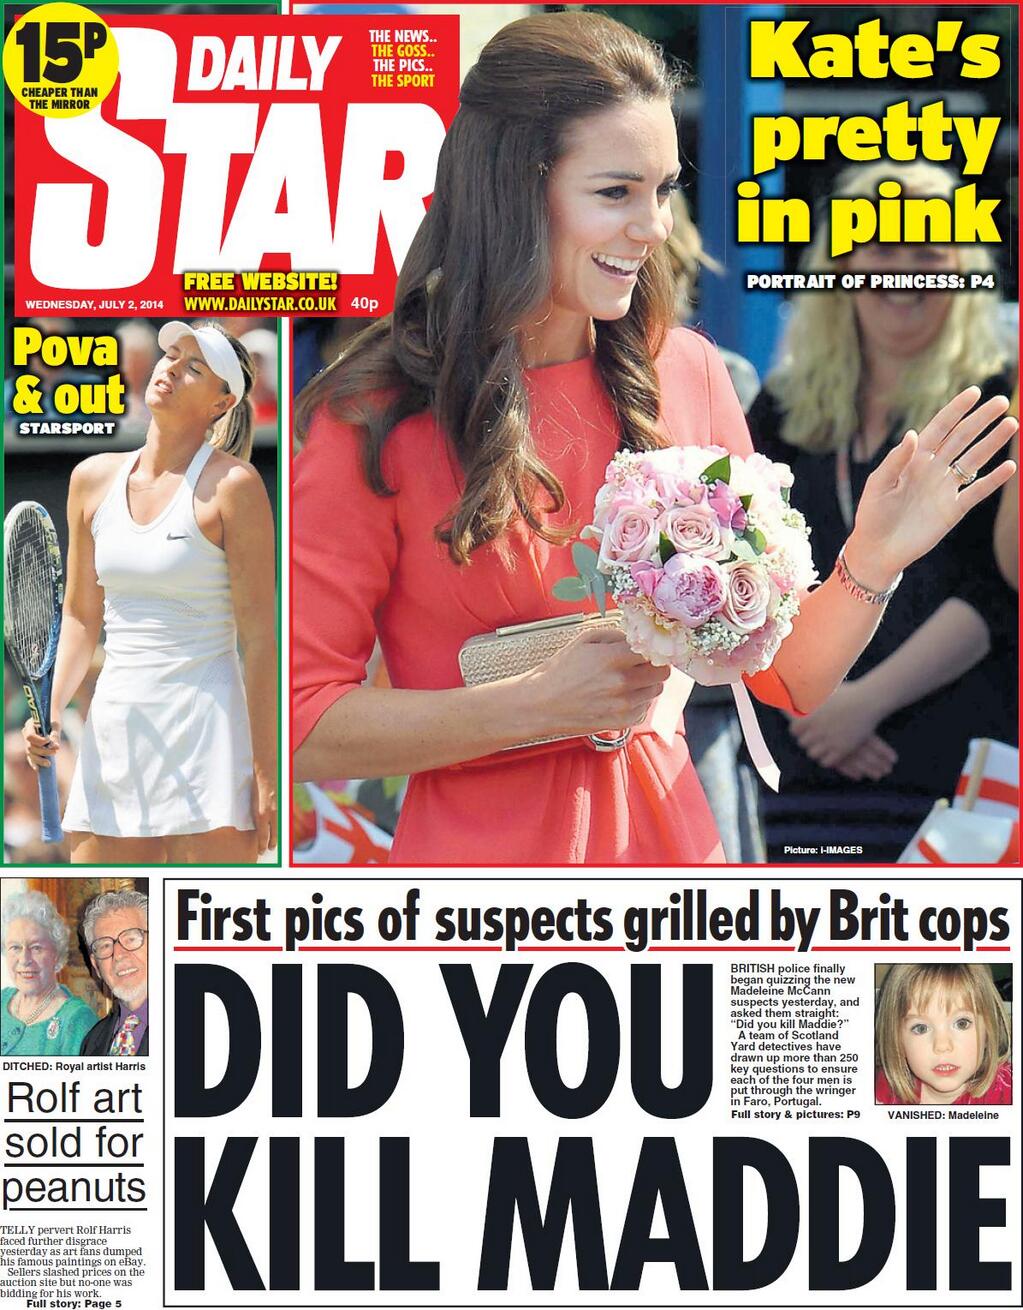 Did you kill Maddie - Daily Star, 02 July 2014 (paper edition)